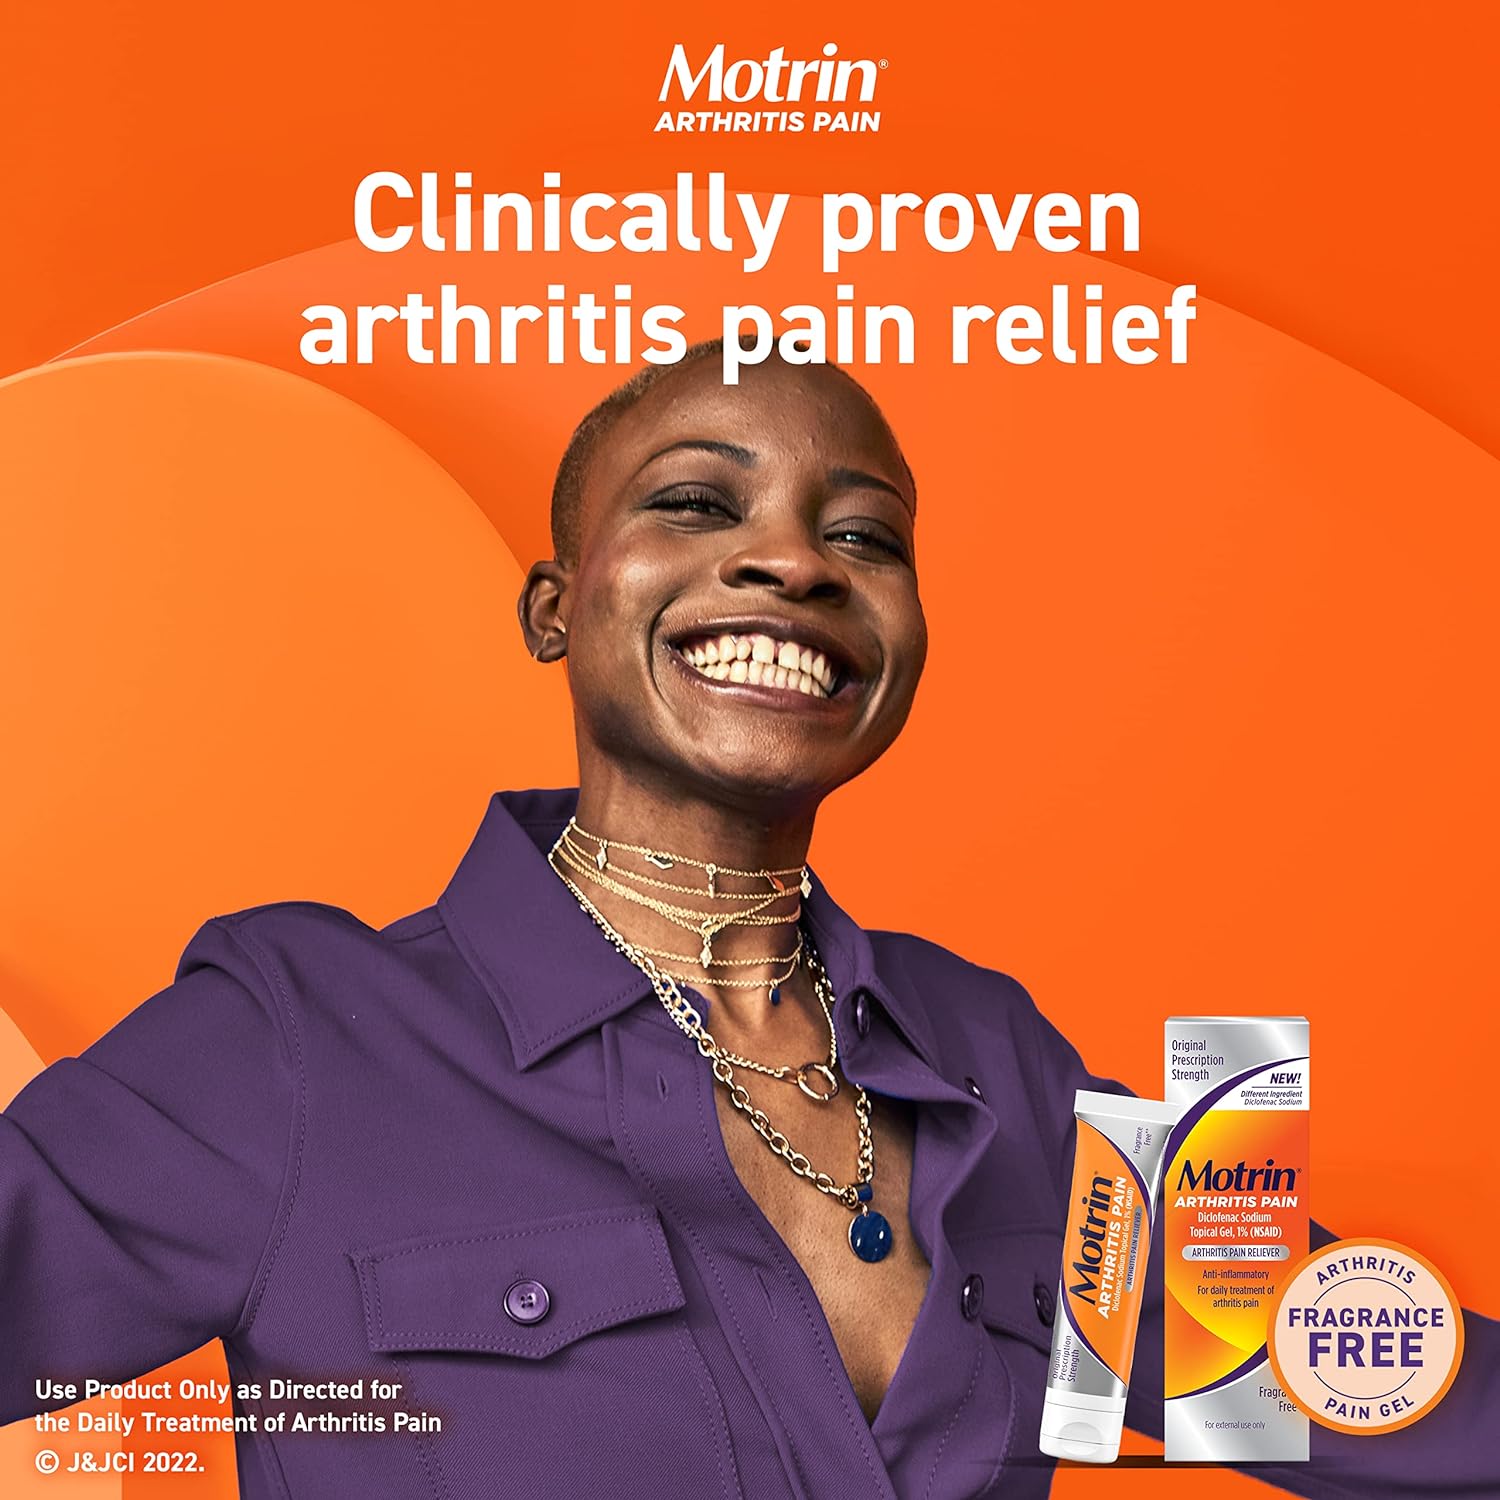 Motrin Arthritis Pain Relief Diclofenac Sodium Topical Gel 1%, Anti-Inflammatory Cream for Arthritis Pain in Hands, Wrists, Elbows, Knees, Feet & Ankles, NSAID Pain Relief Gel, 3.53 Oz : Health & Household